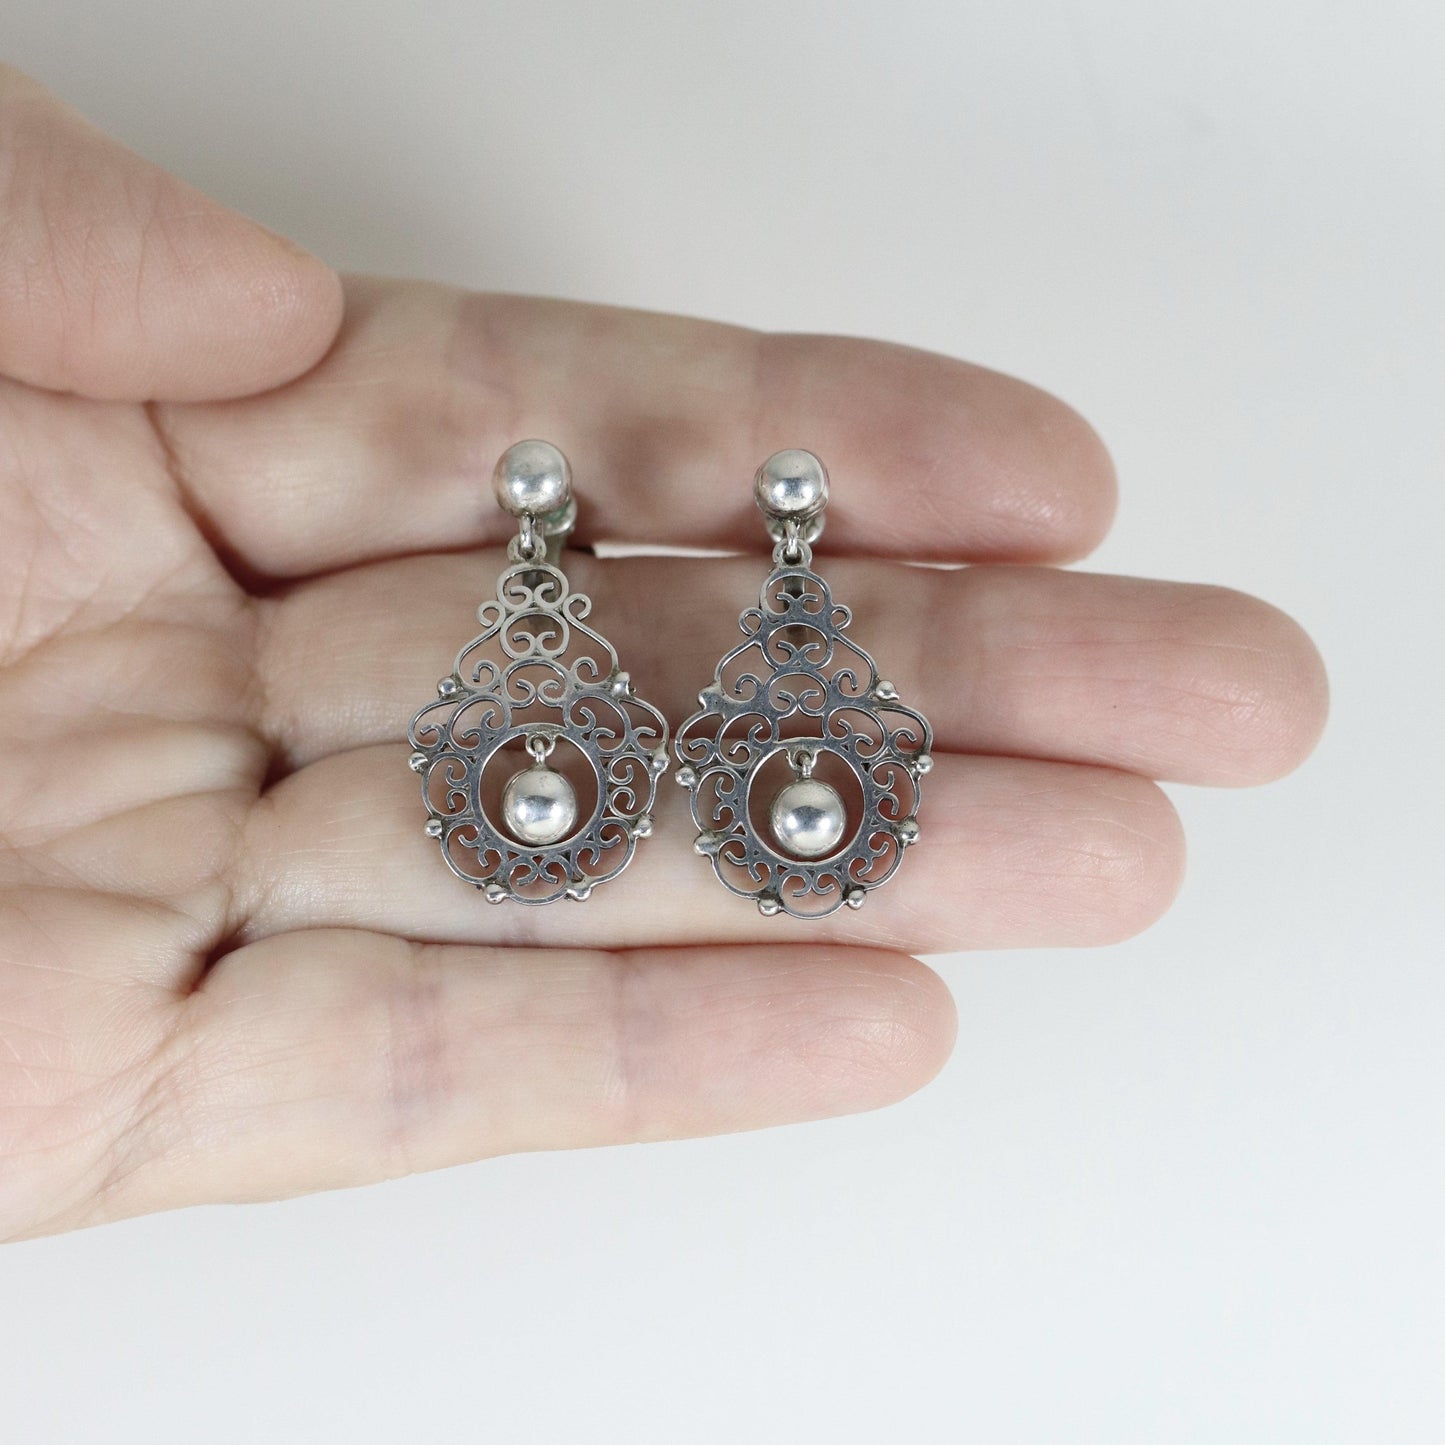 Vintage Modernist Silver Jewelry | Silver Ball and Lace Screwback Earrings - Carmel Fine Silver Jewelry